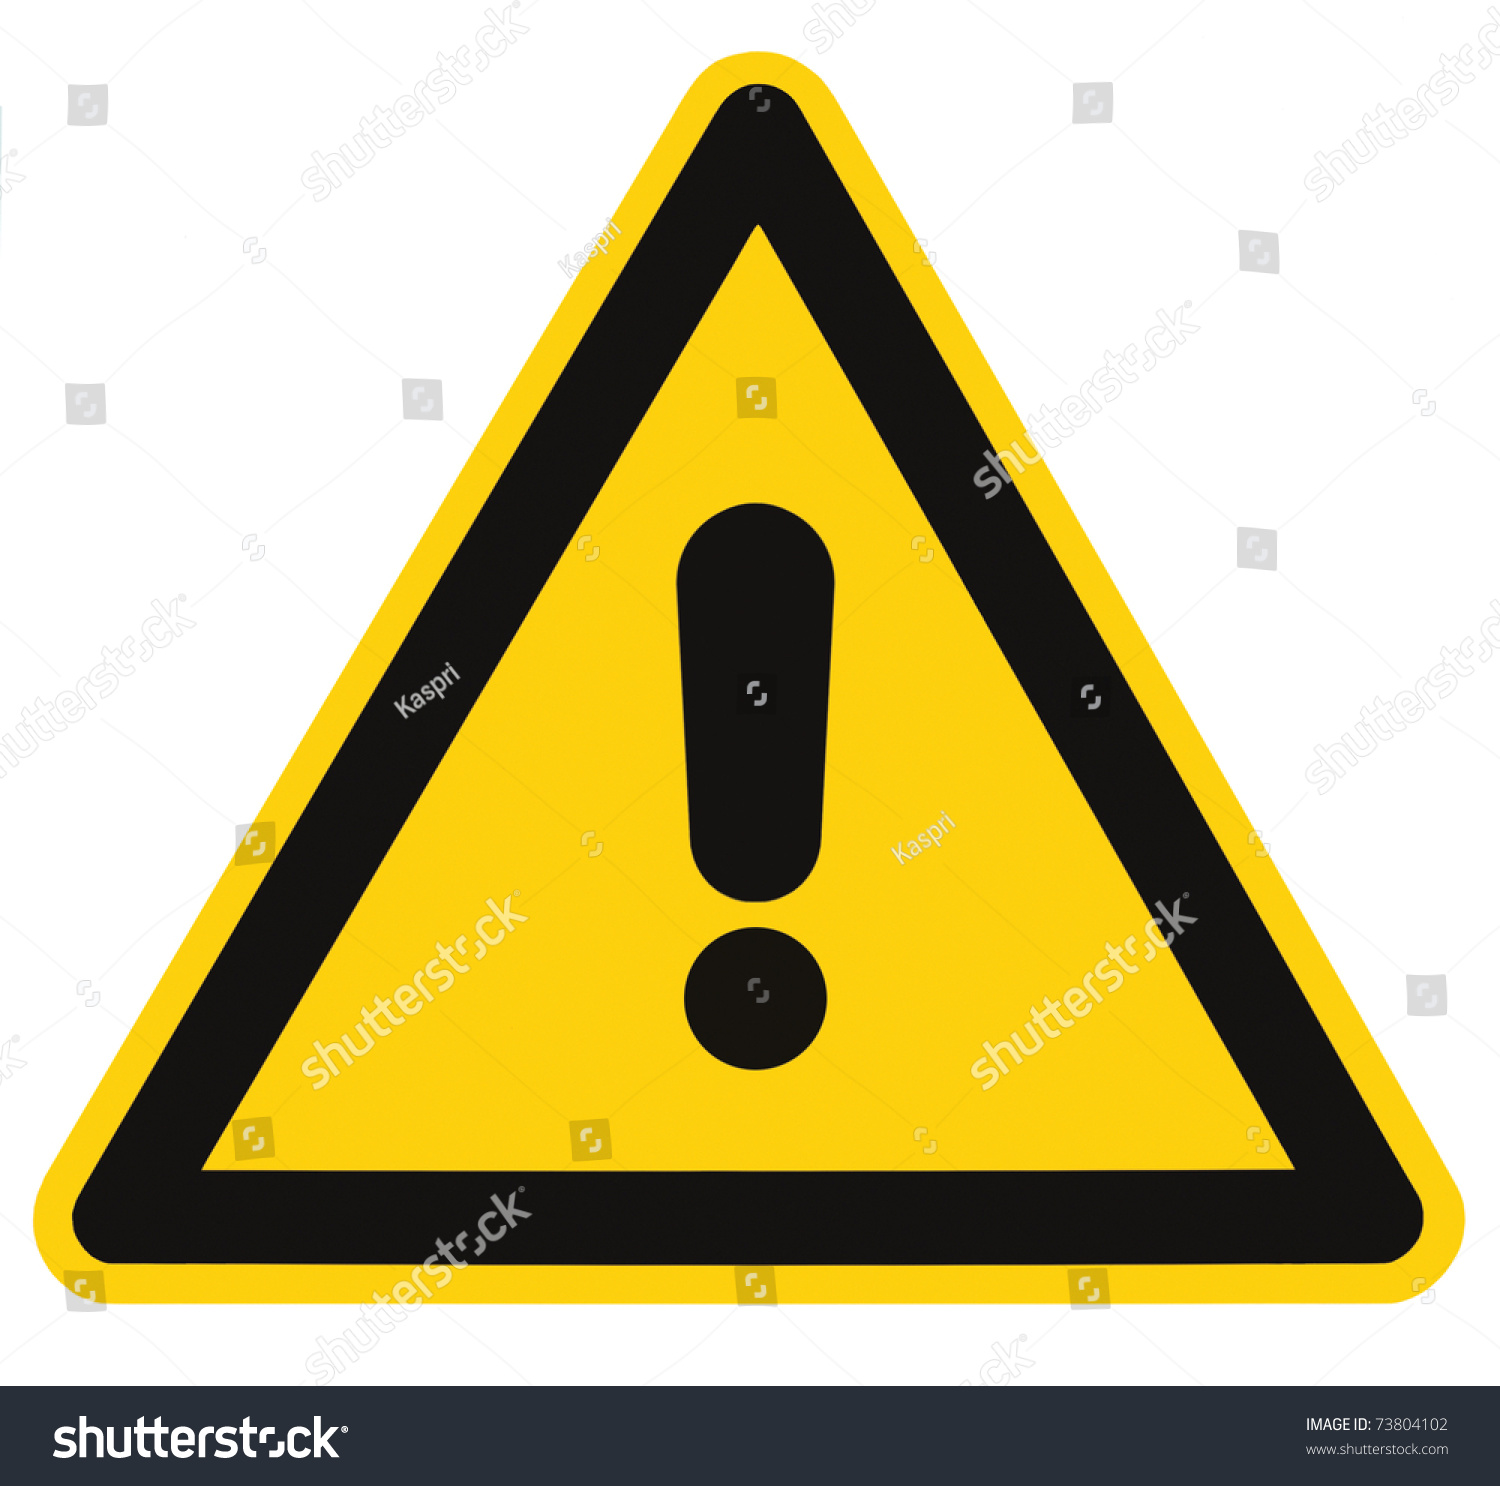 Blank Other Danger And Hazard Sign, isolated, black general warning triangle over yellow, large macro #73804102